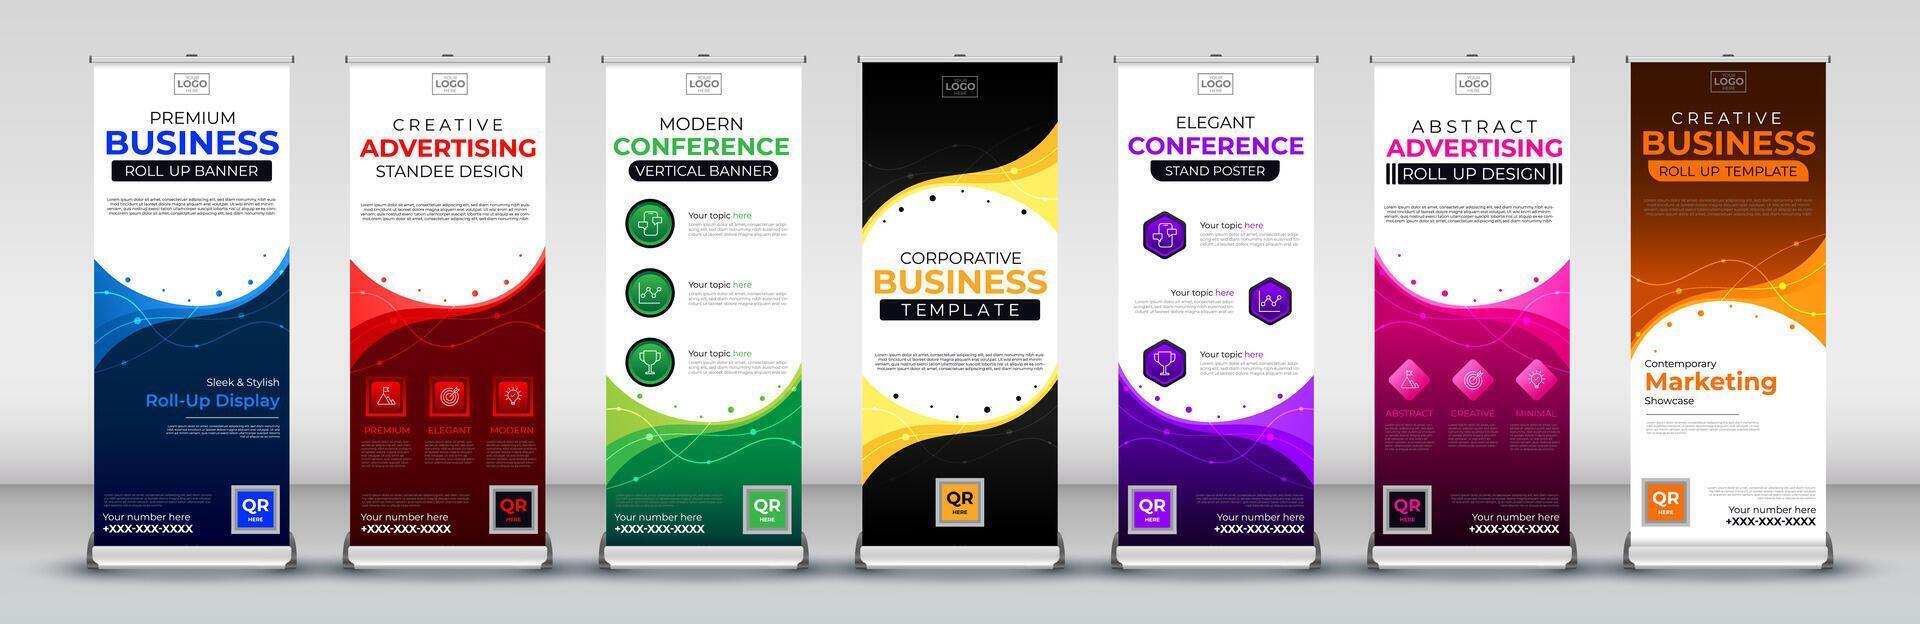 Business roll up banner design for business events, annual meetings, presentations, marketing, promotions, in blue, red, green, yellow, purple, pink and orange print ready colors vector